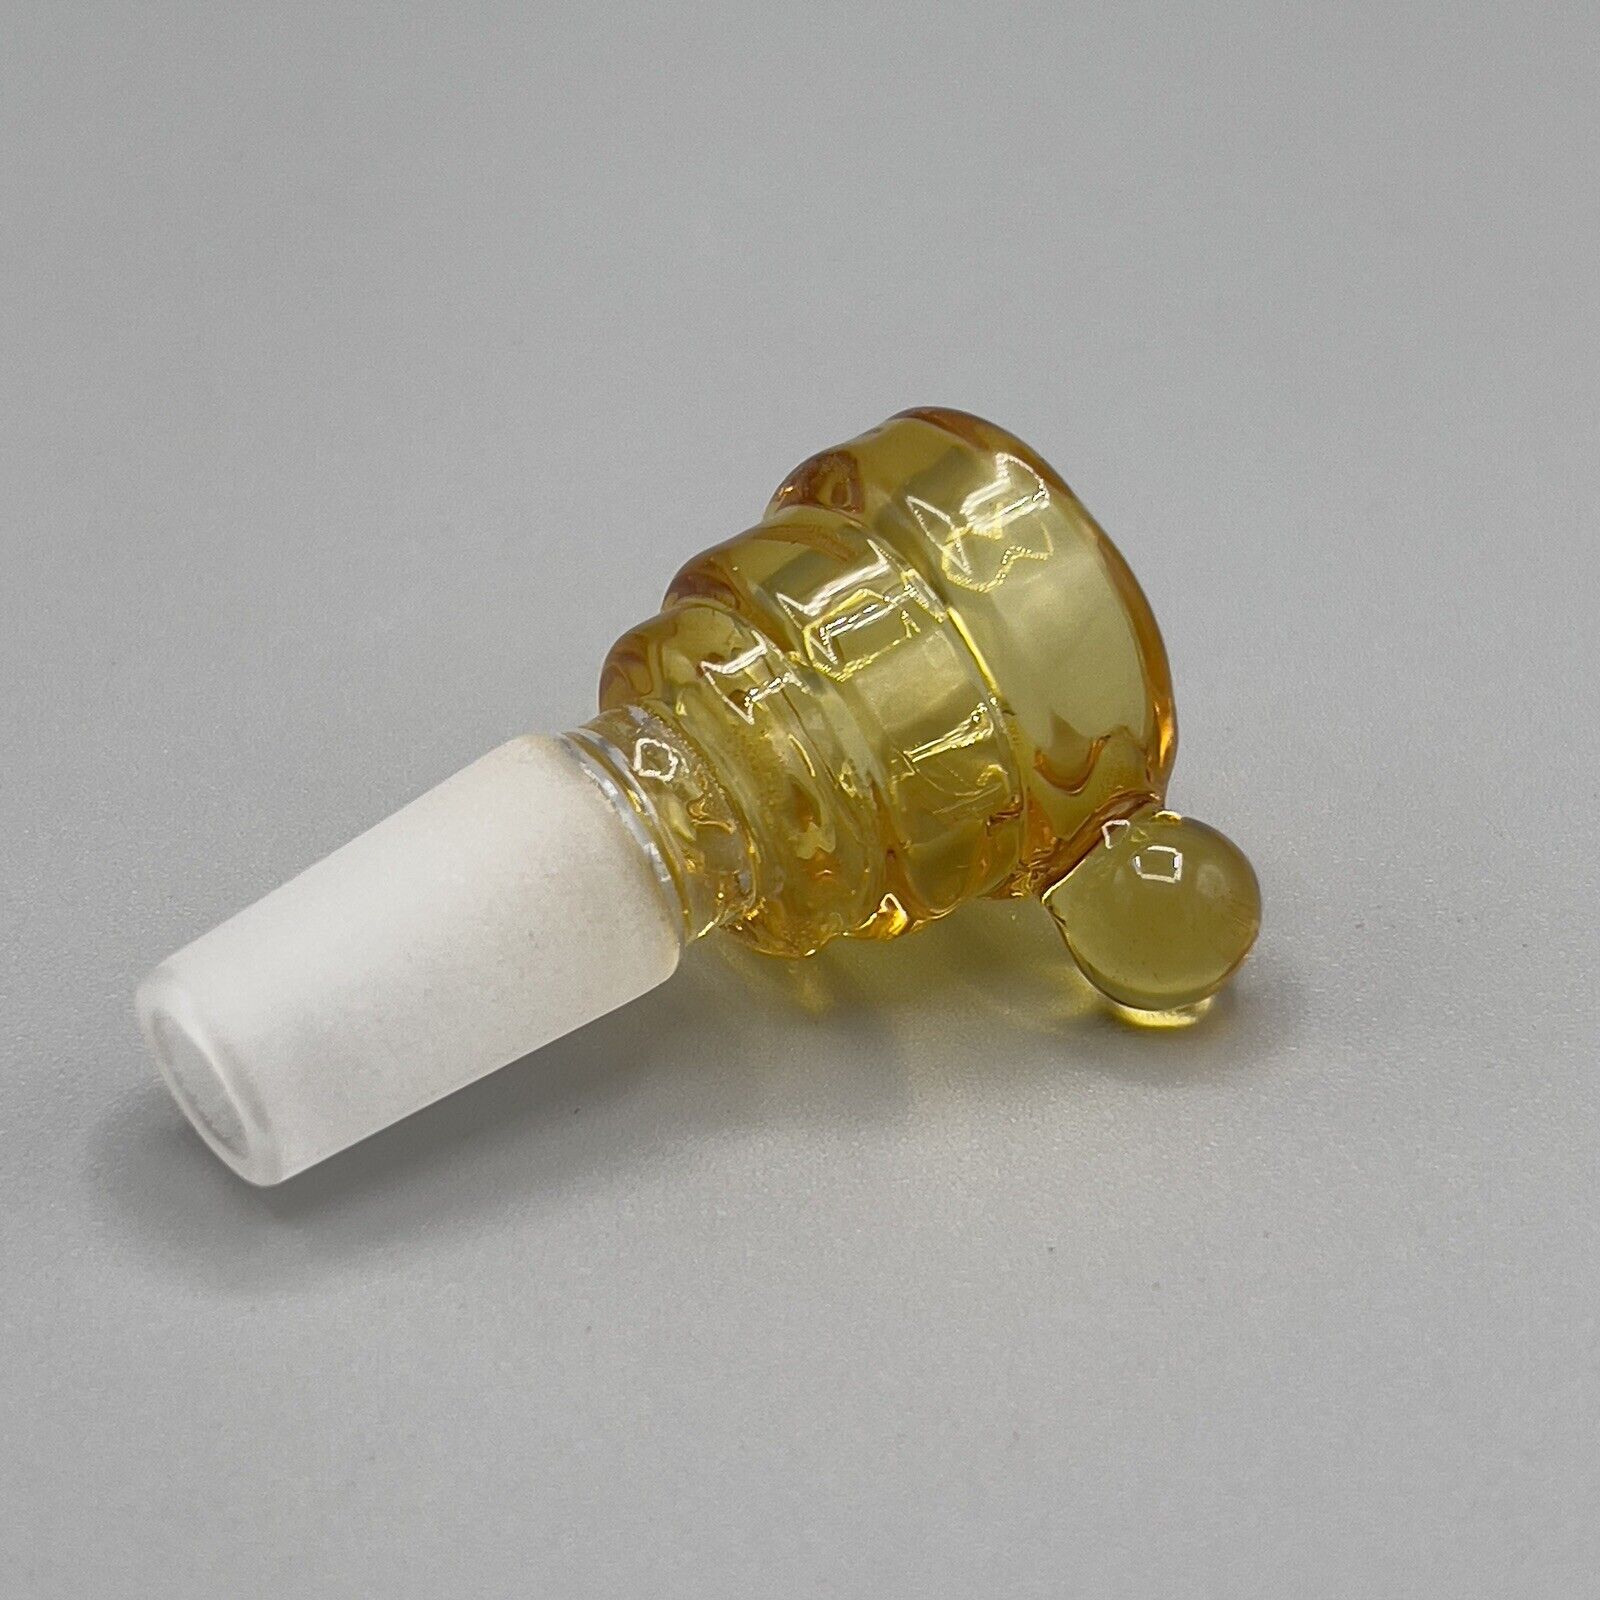 14mm Replacement Bowl Glass Bowl Slide Piece Head Water Pipe Slider - Yellow